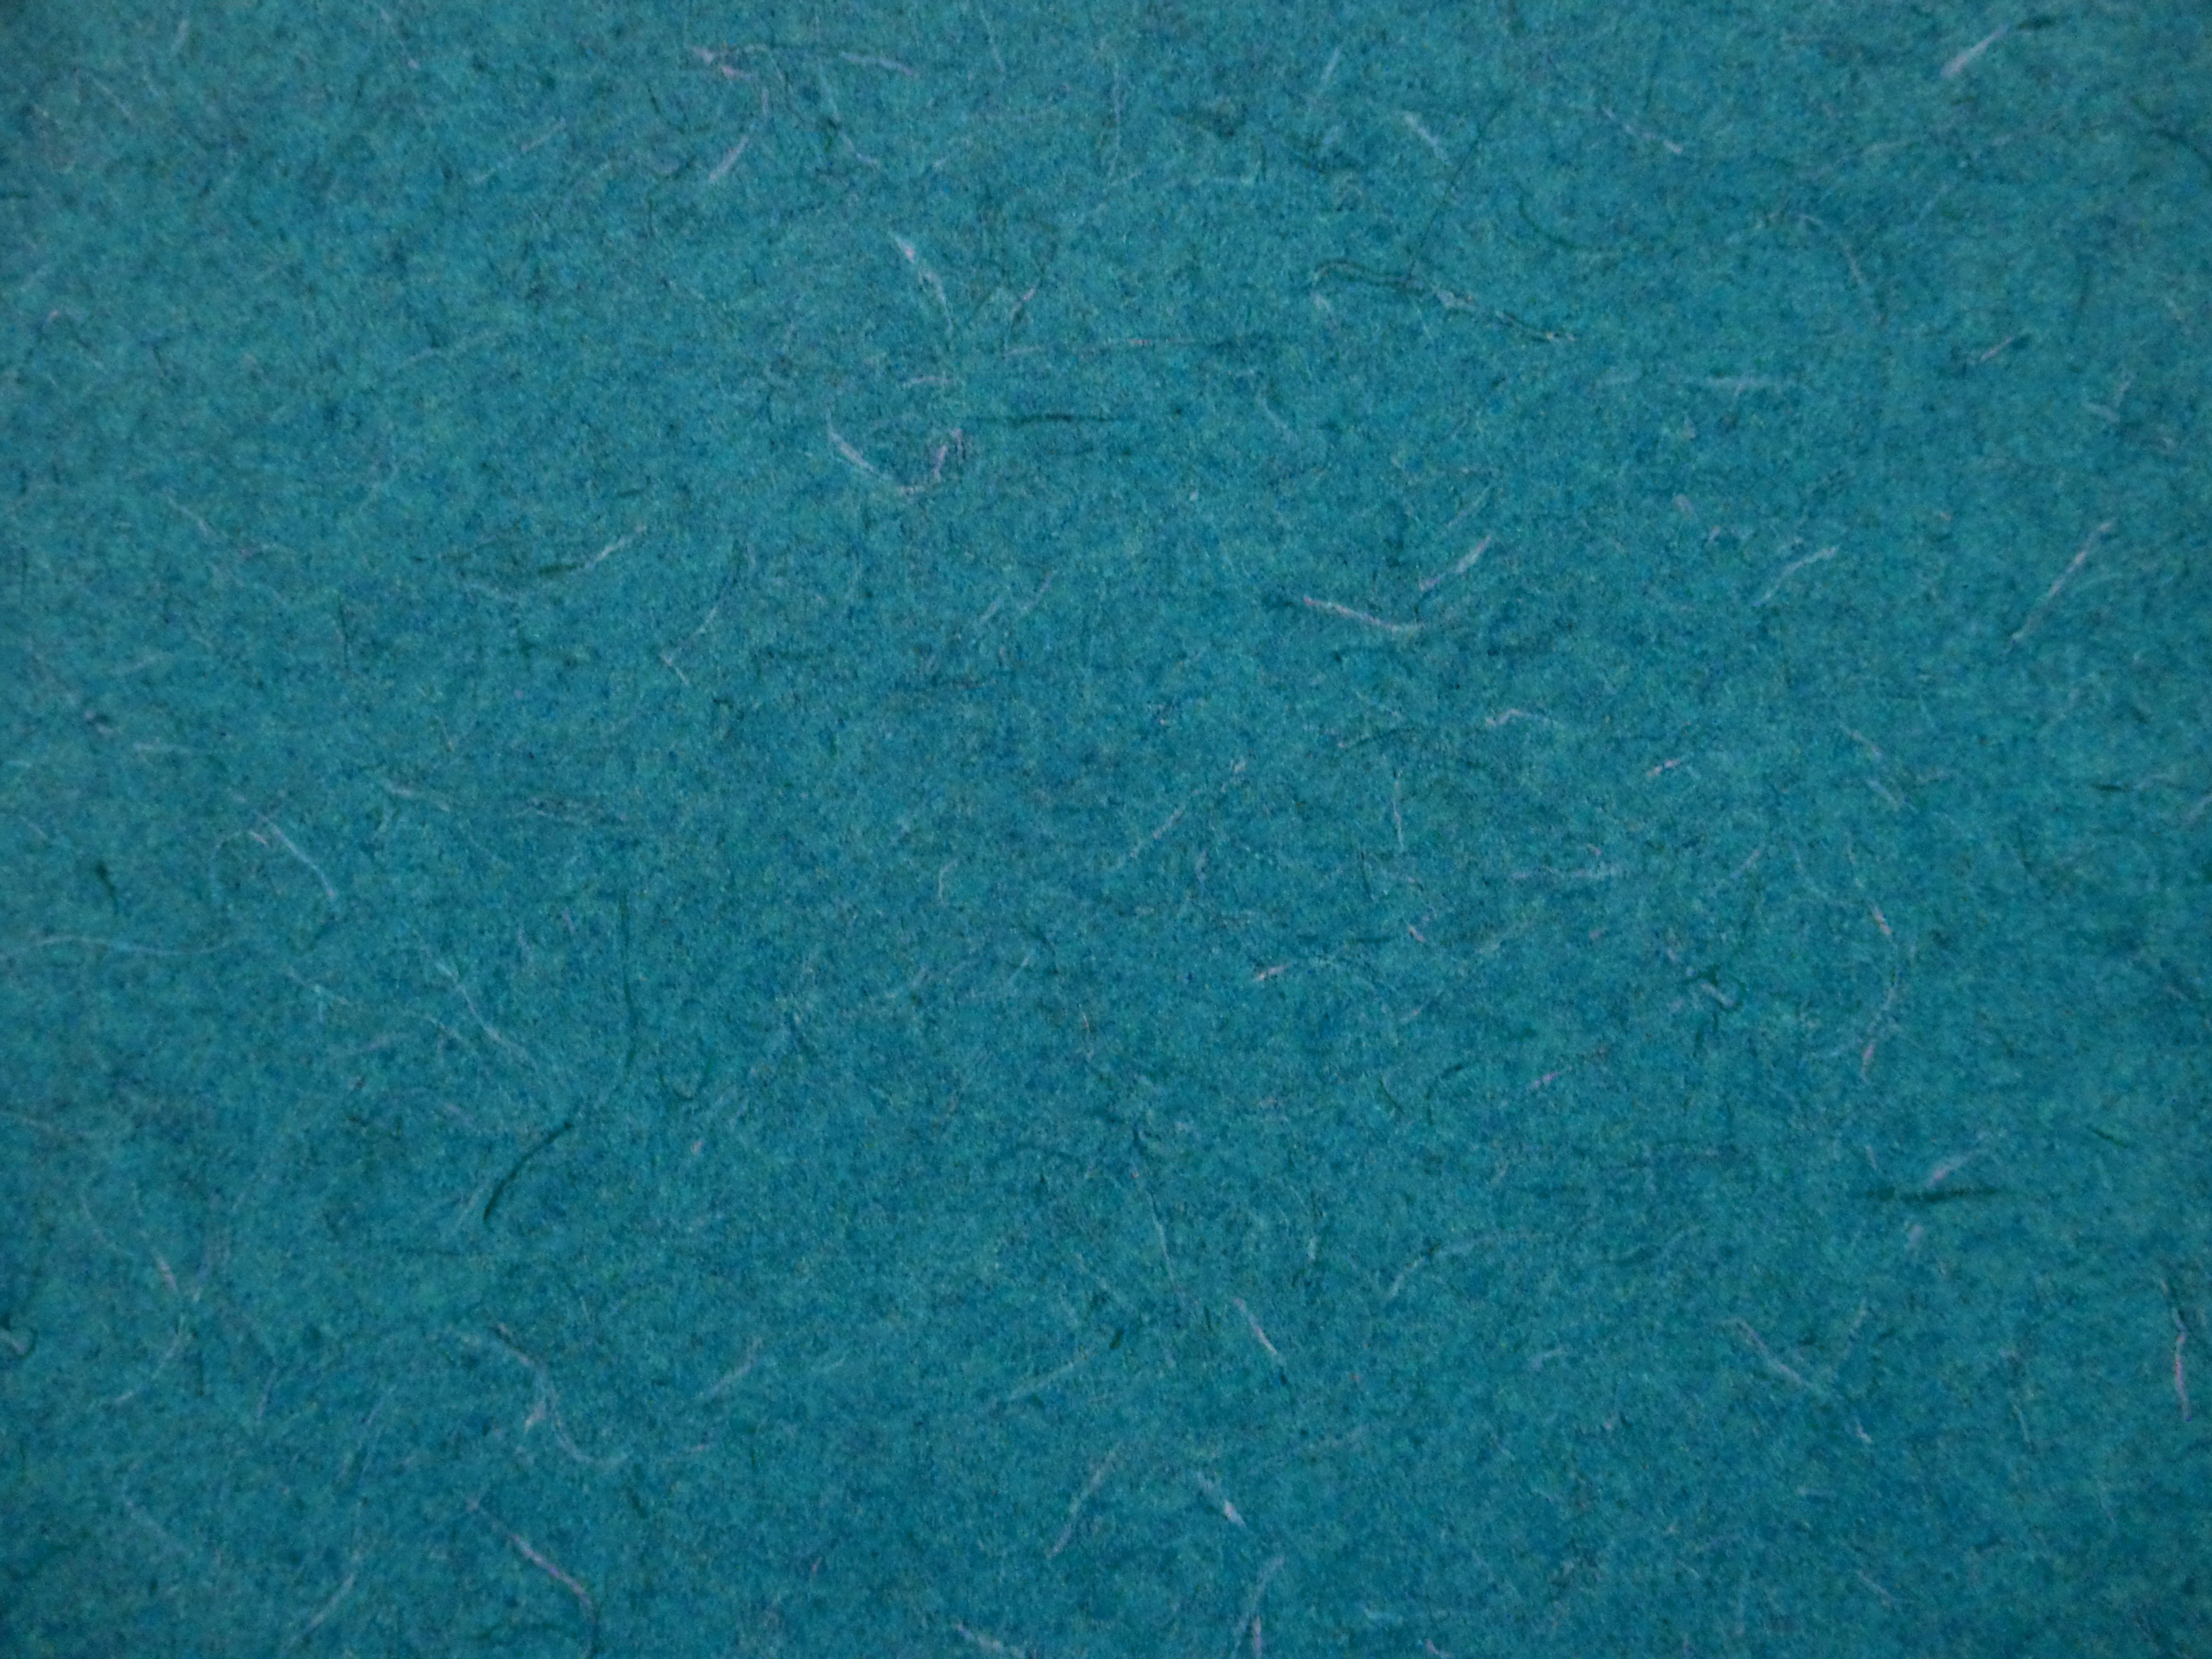 Teal Abstract Pattern Laminate Countertop Texture Picture